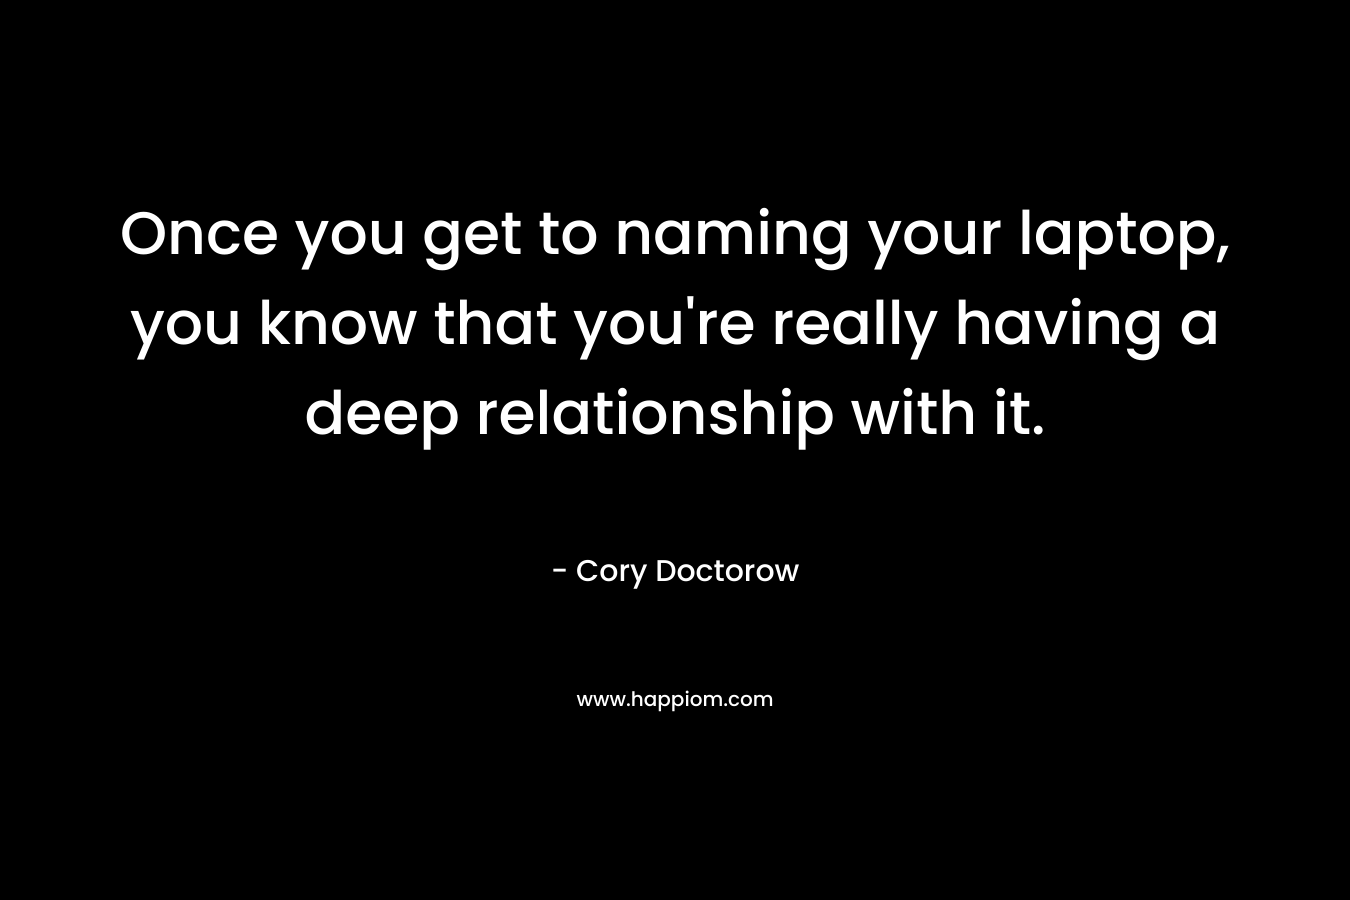 Once you get to naming your laptop, you know that you’re really having a deep relationship with it. – Cory Doctorow